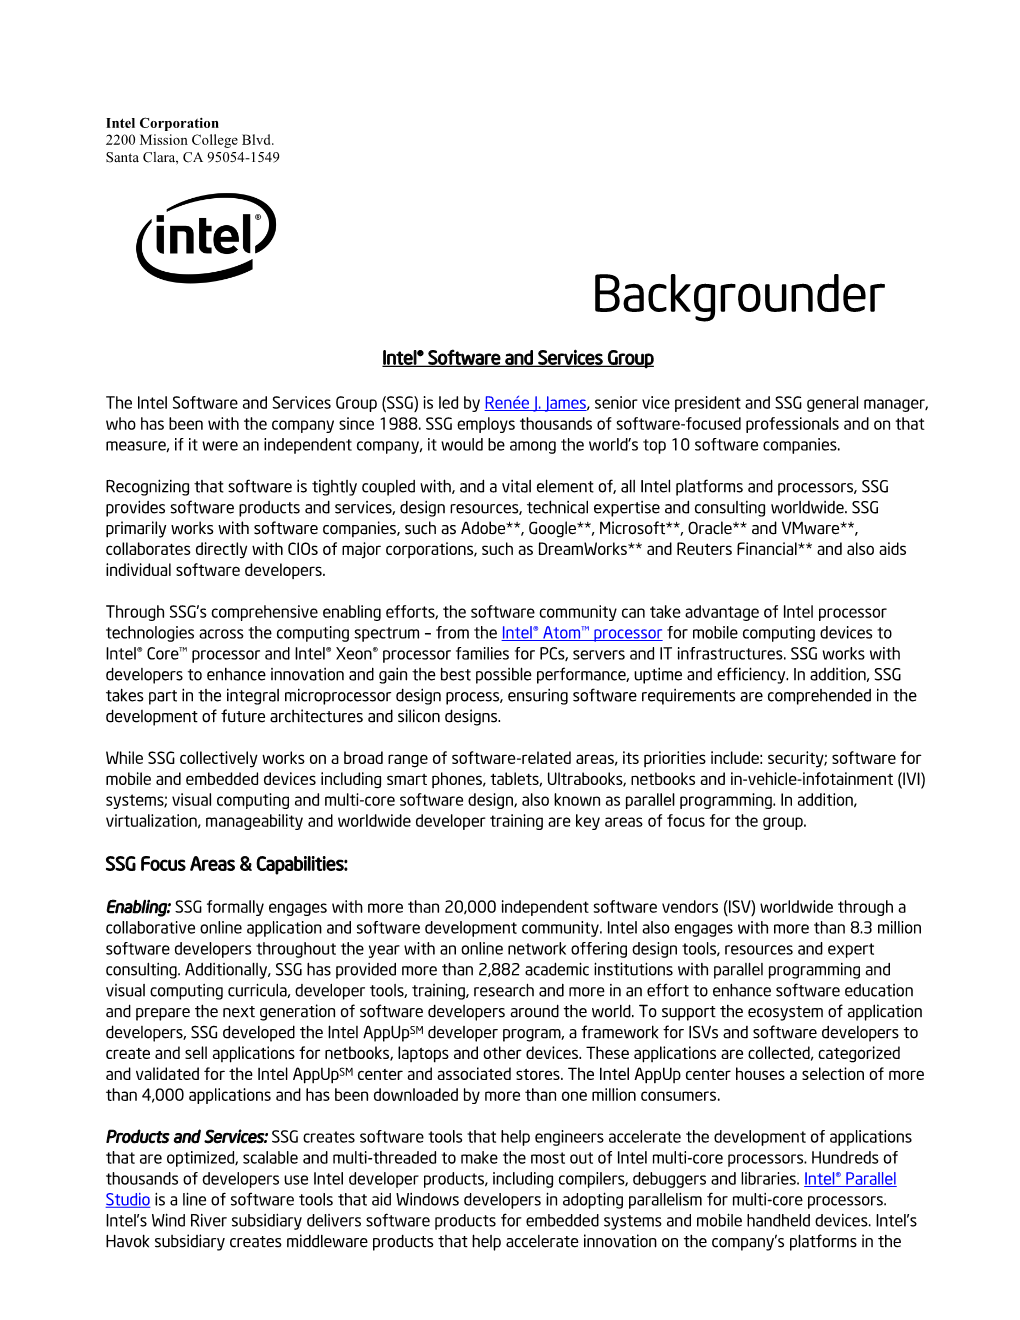 Backgrounder: Intel® Software and Services Group